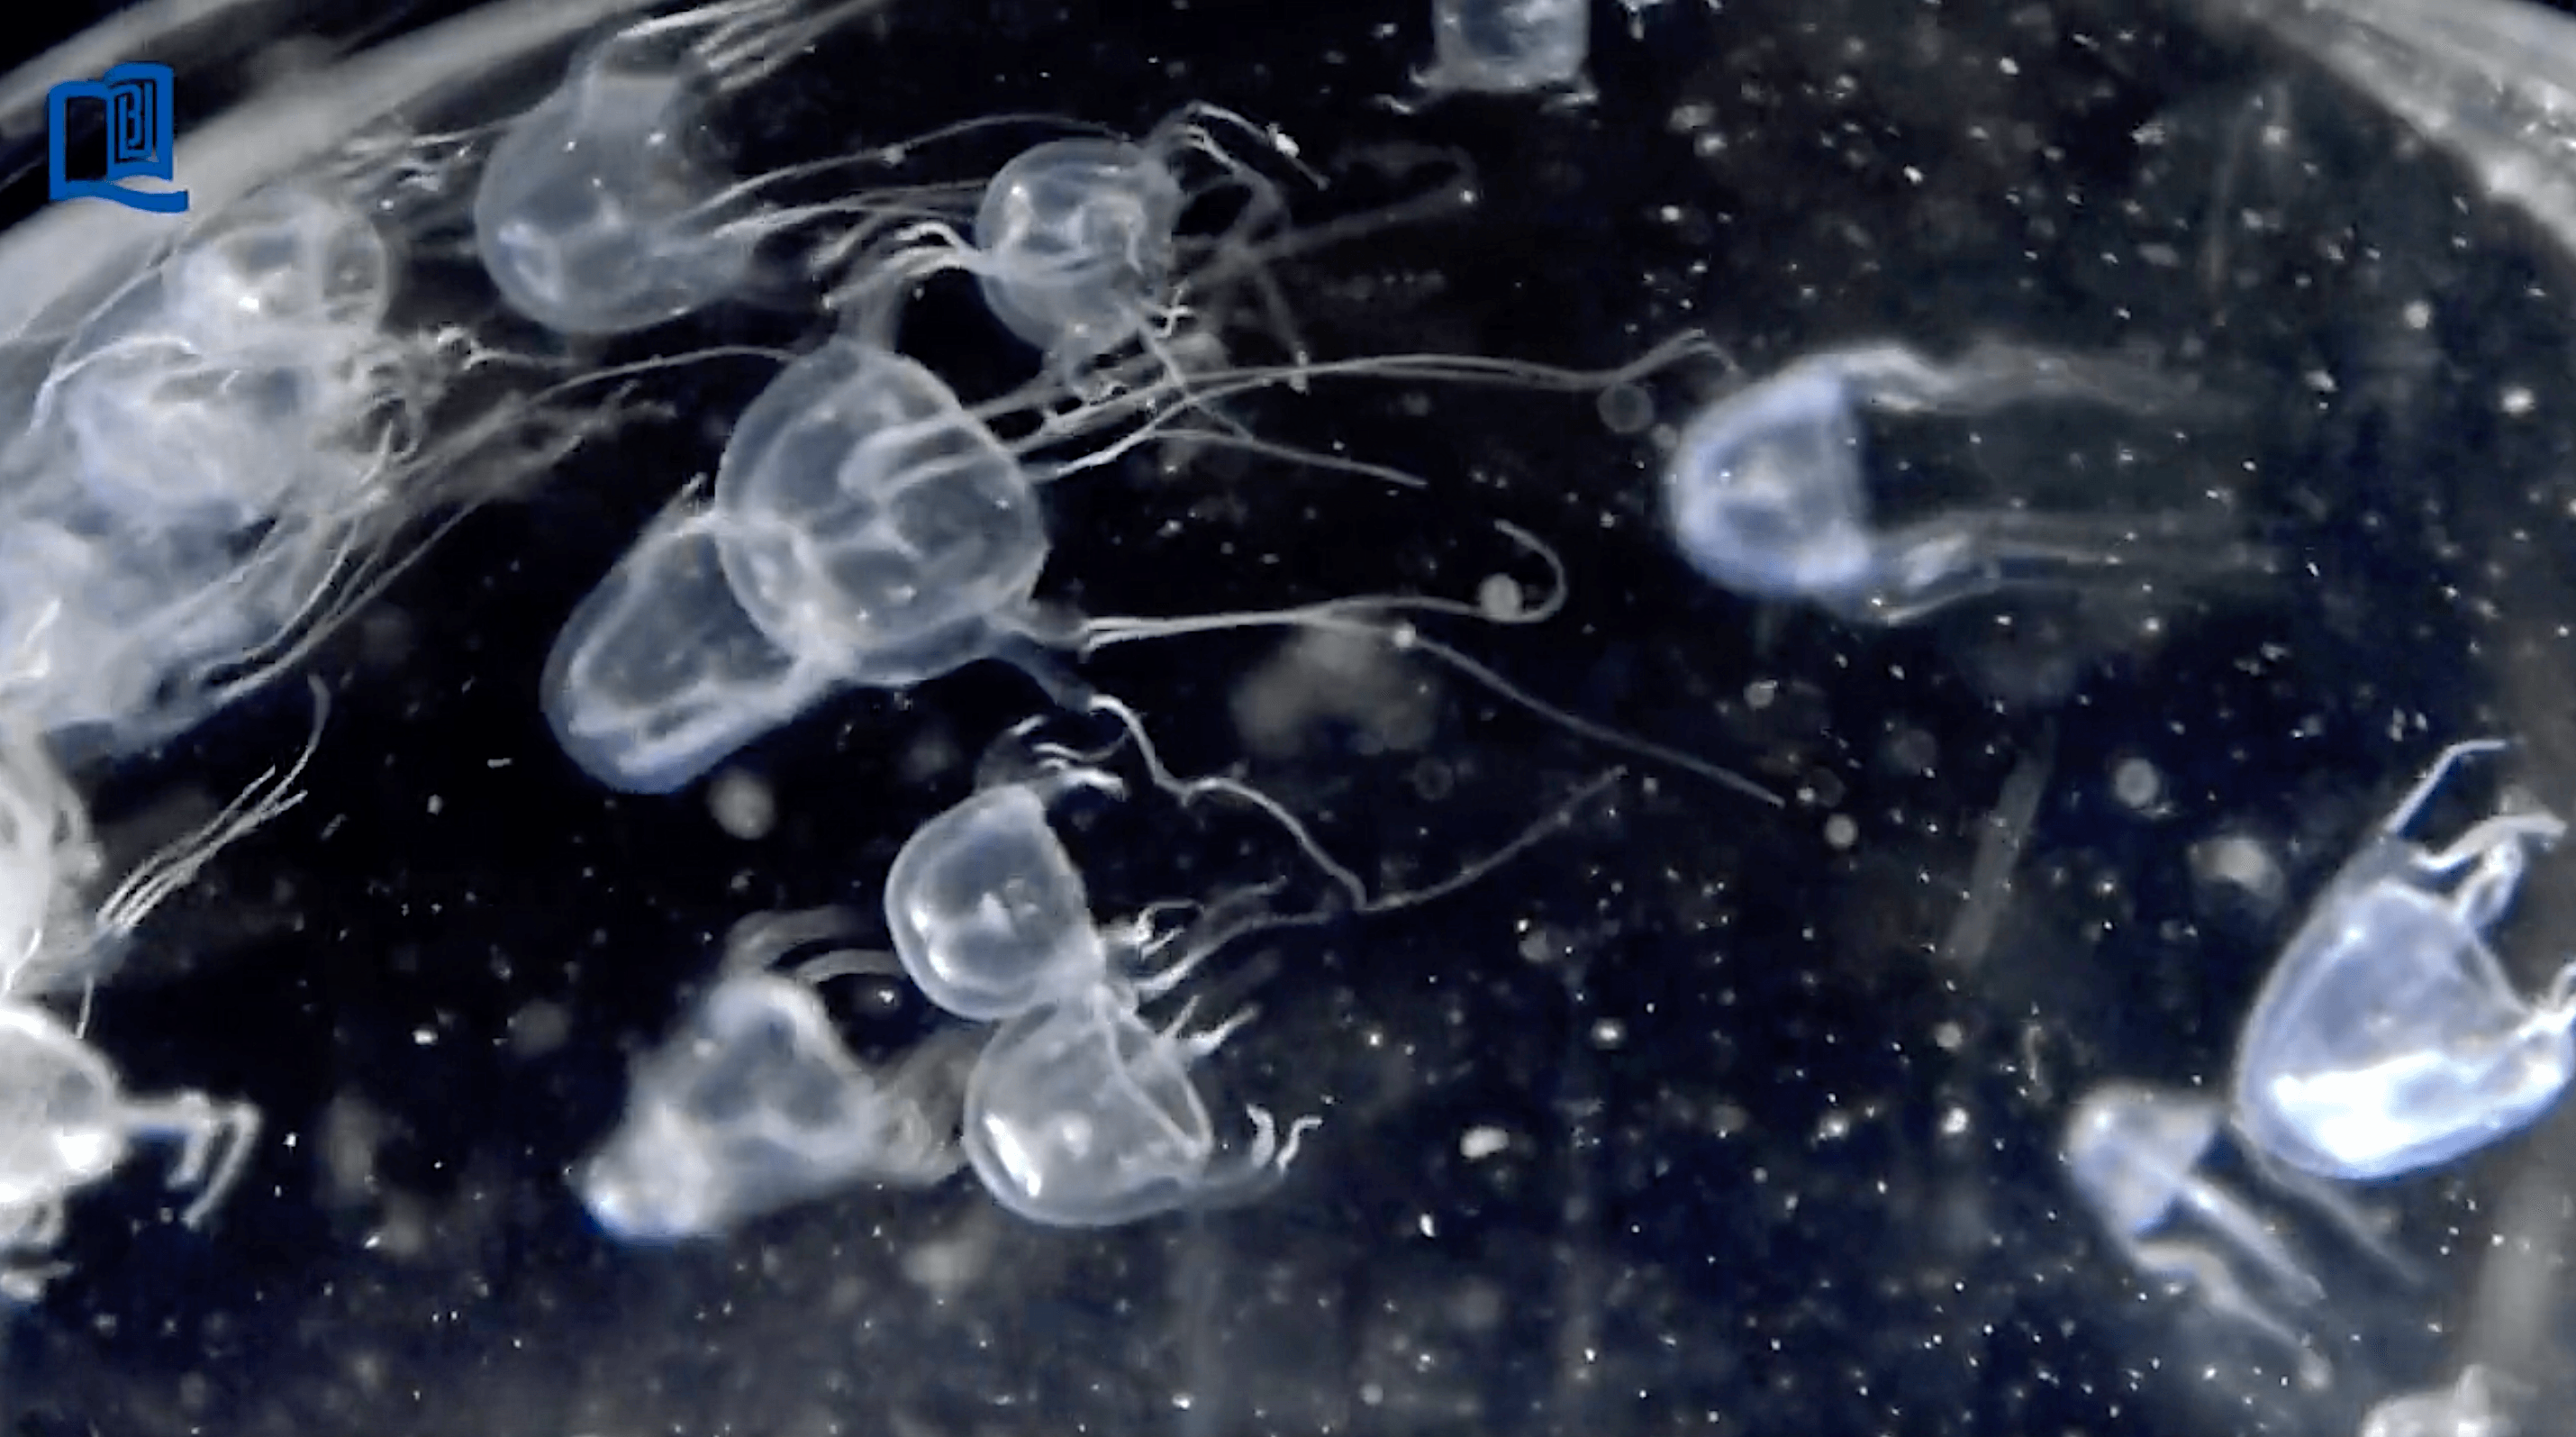 New box jellyfish species found in Hong Kong’s waters – study